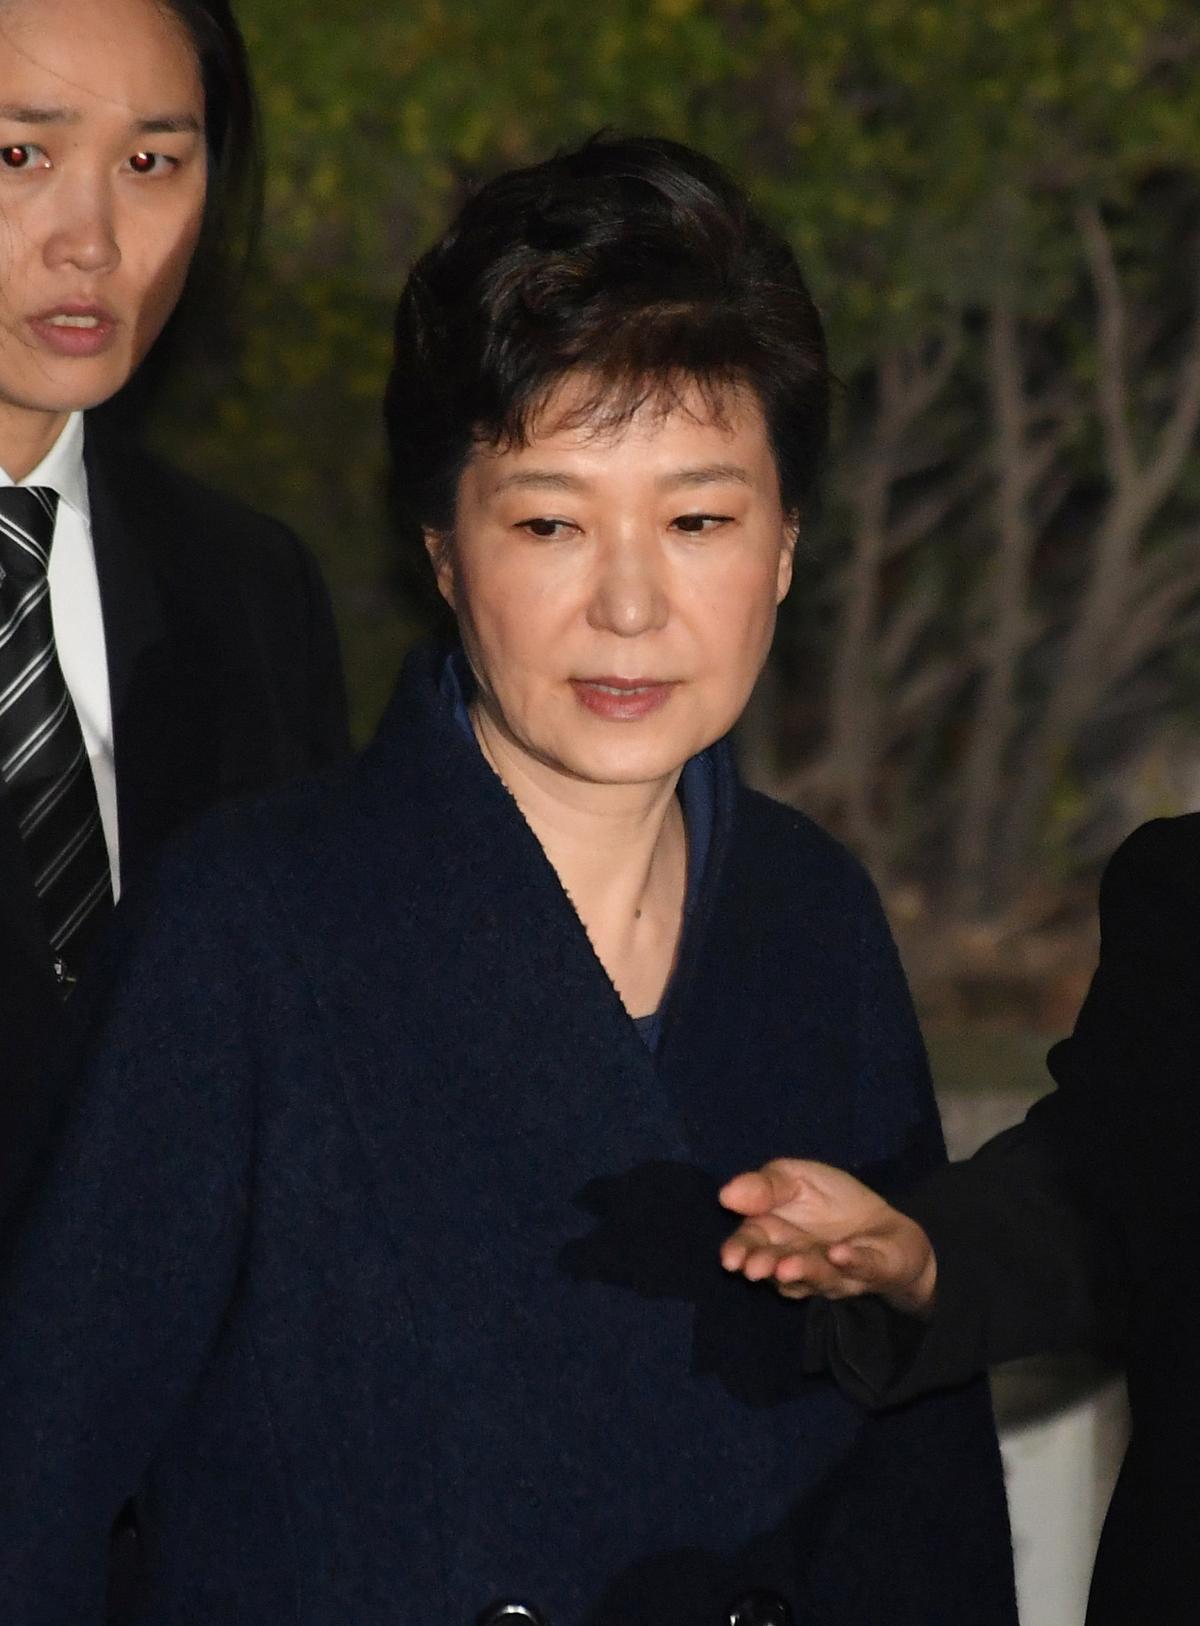 Ousted South Korean President Park Geun-hye, leaves after hearing on a prosecutors' request for her arrest for corruption at the Seoul Central District Court on March 30, 2017. (REUTERS/Song Kyung-Seok/Pool)